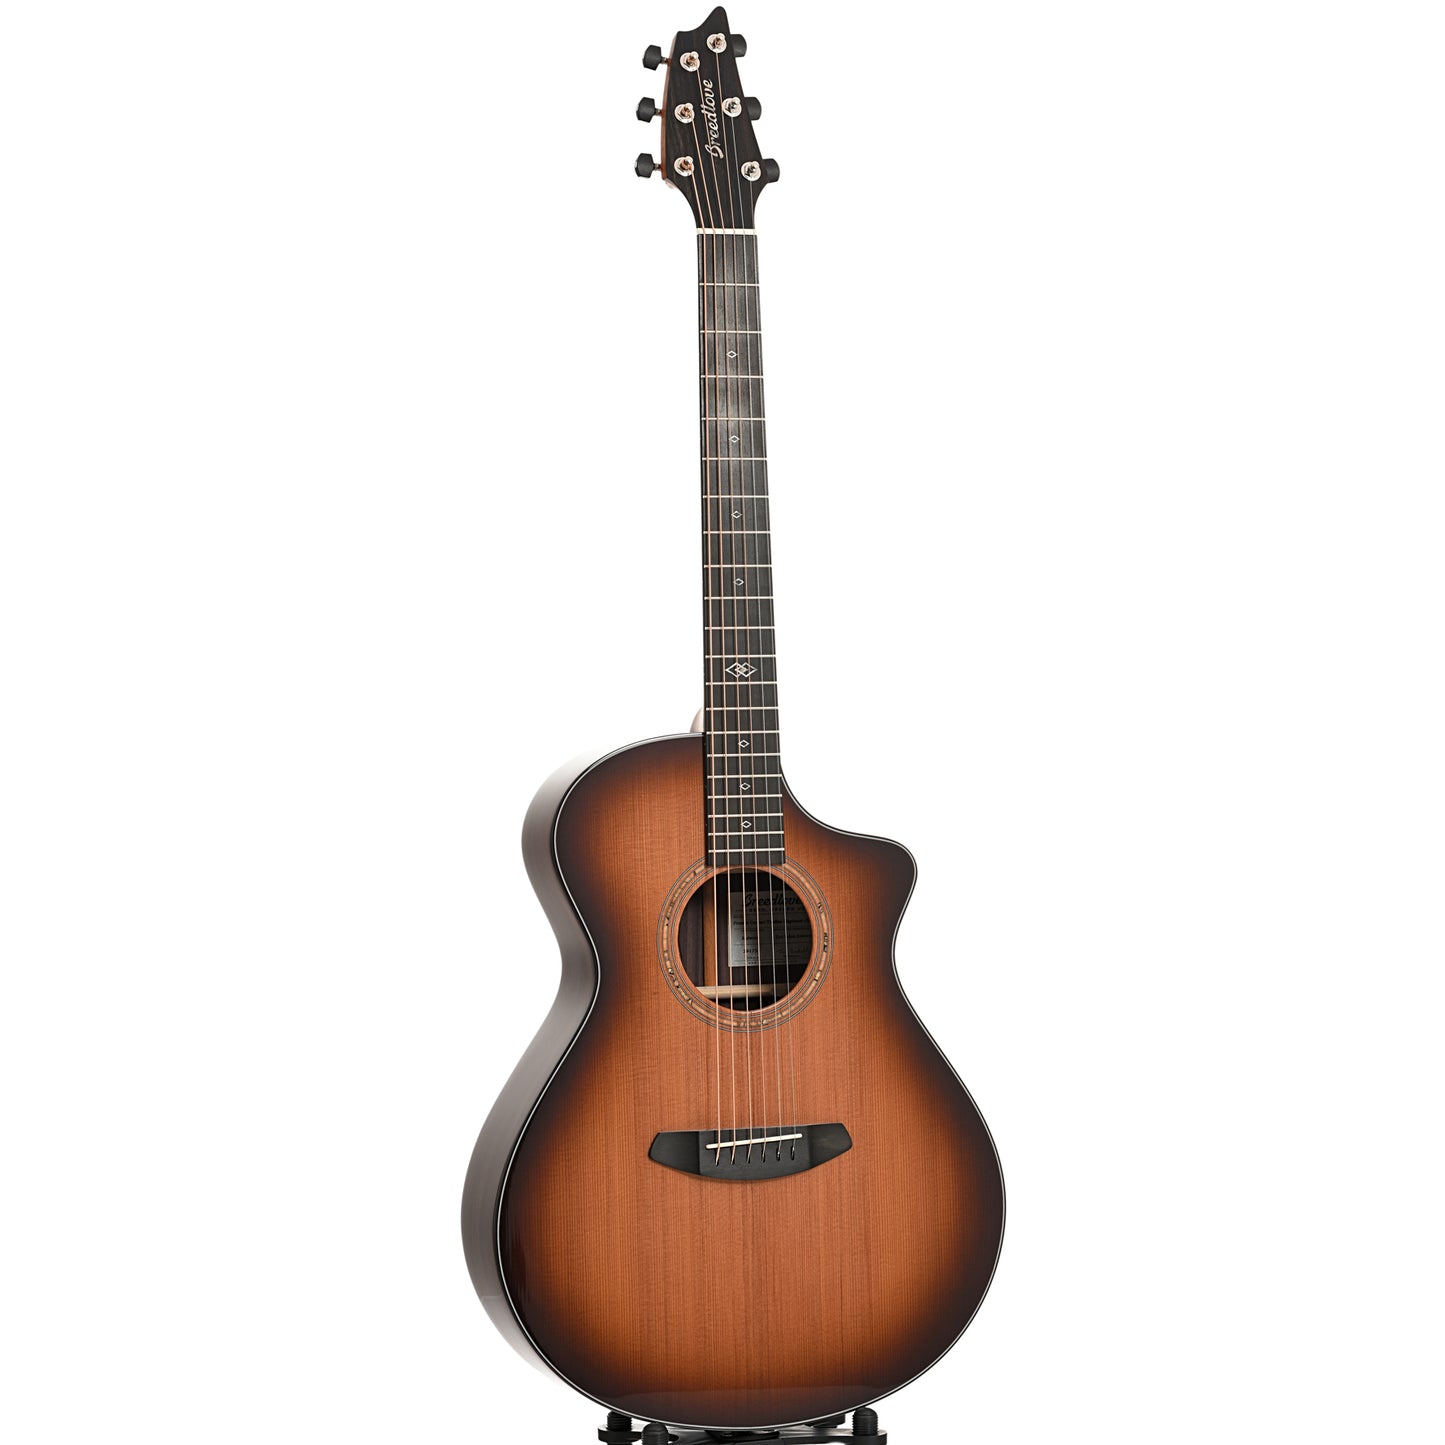 Full front and side of Breedlove Premier Concert Thinline Edgeburst CE Acoustic-Electric Guitar